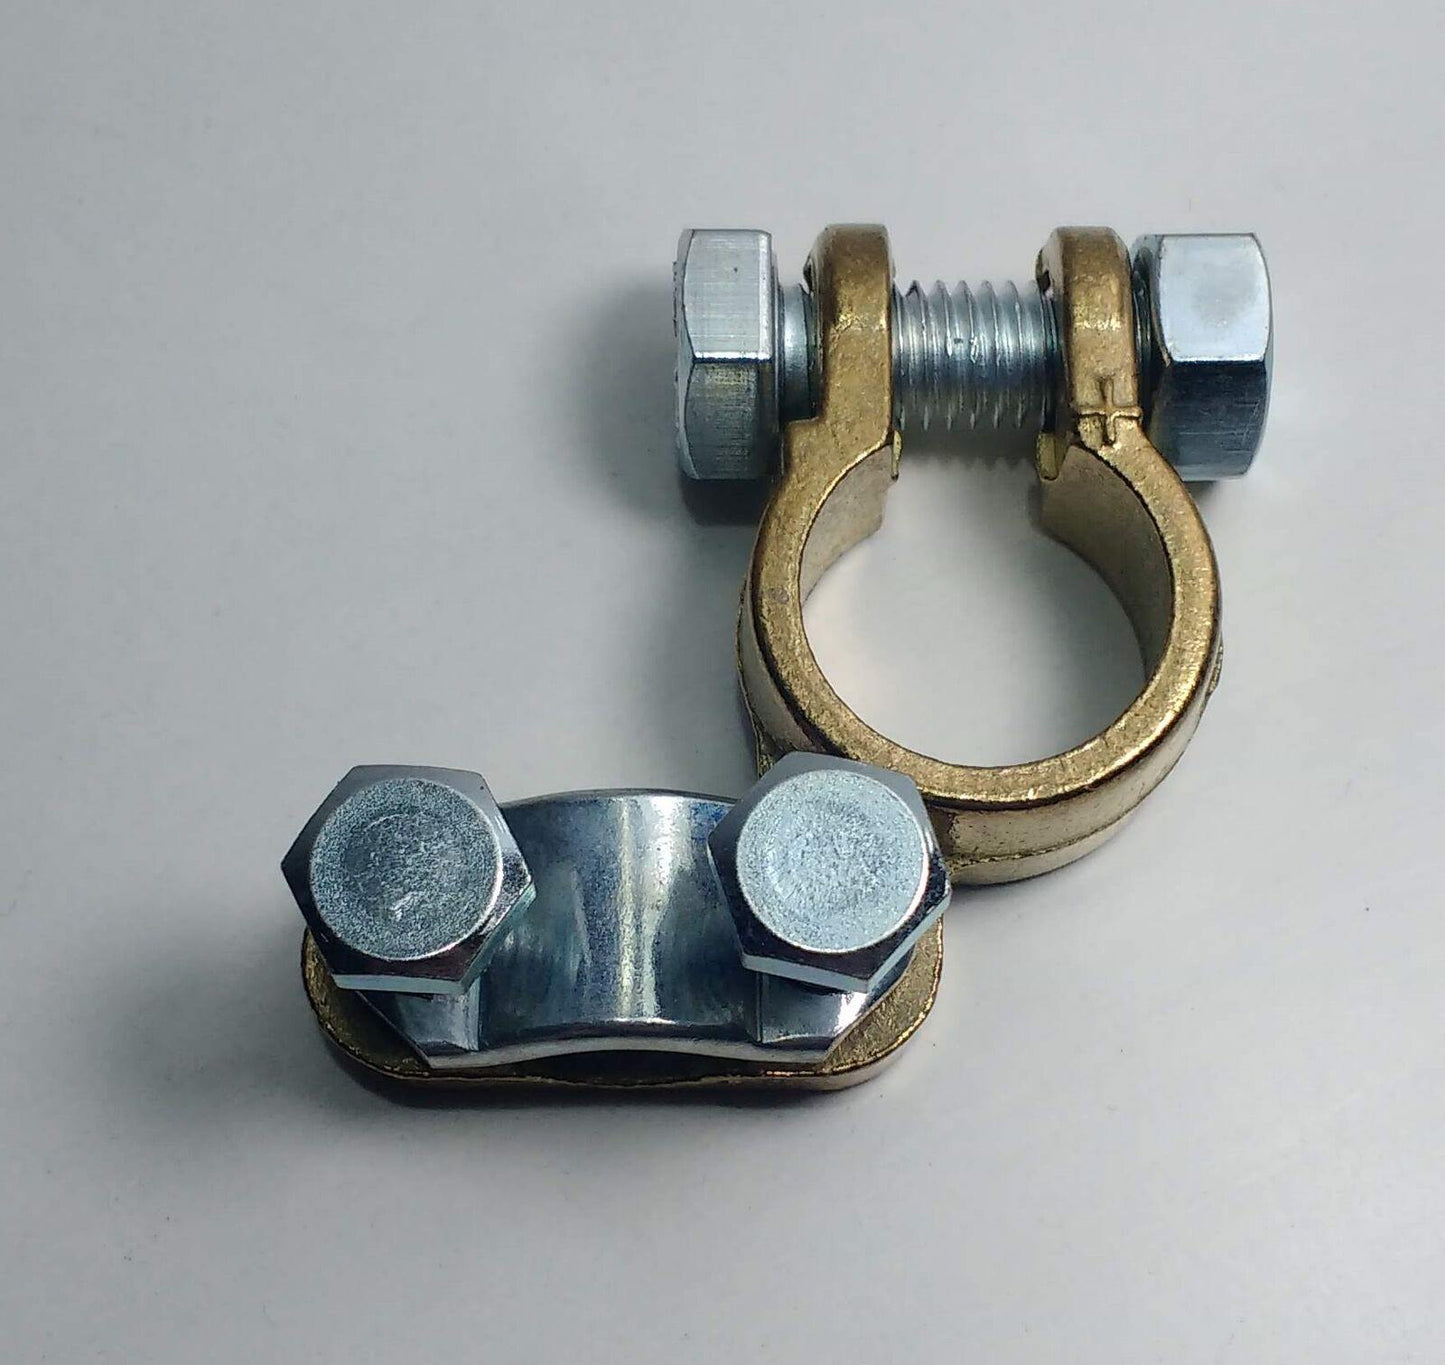 2 X Battery Terminal Moulded Brass 17Mm Up To 25Mm Cable Cargo 192369 & 192368 - Mid-Ulster Rotating Electrics Ltd